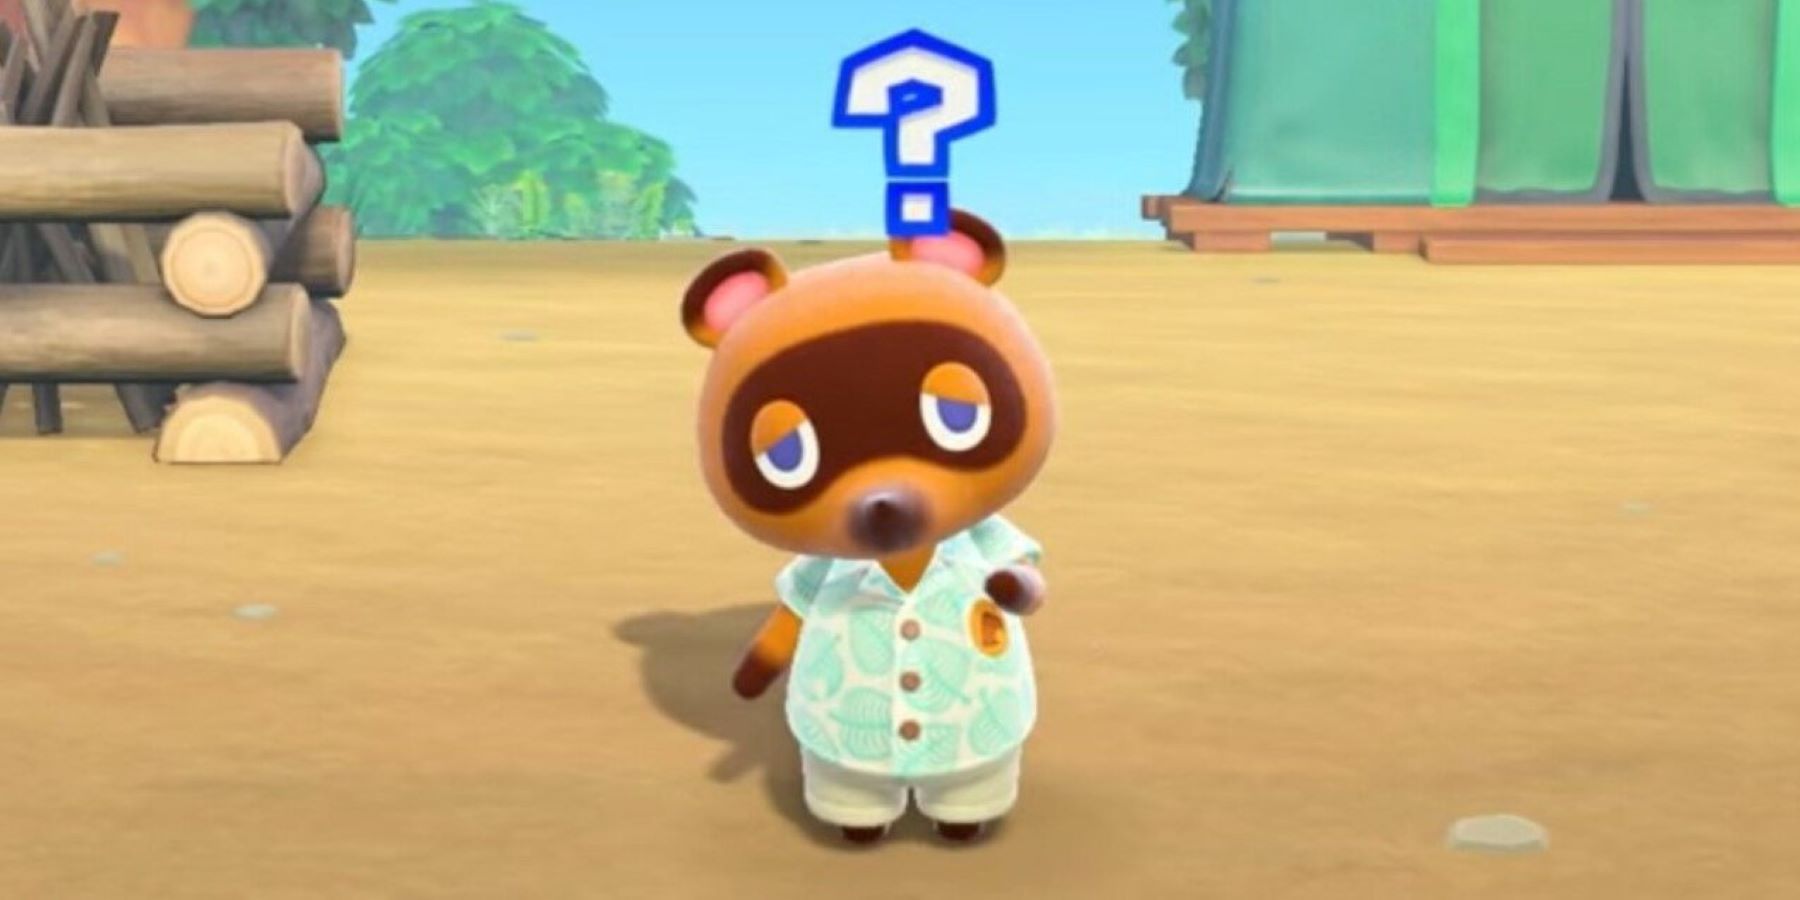 Tom Nook with a question mark in Animal Crossing New Horizons